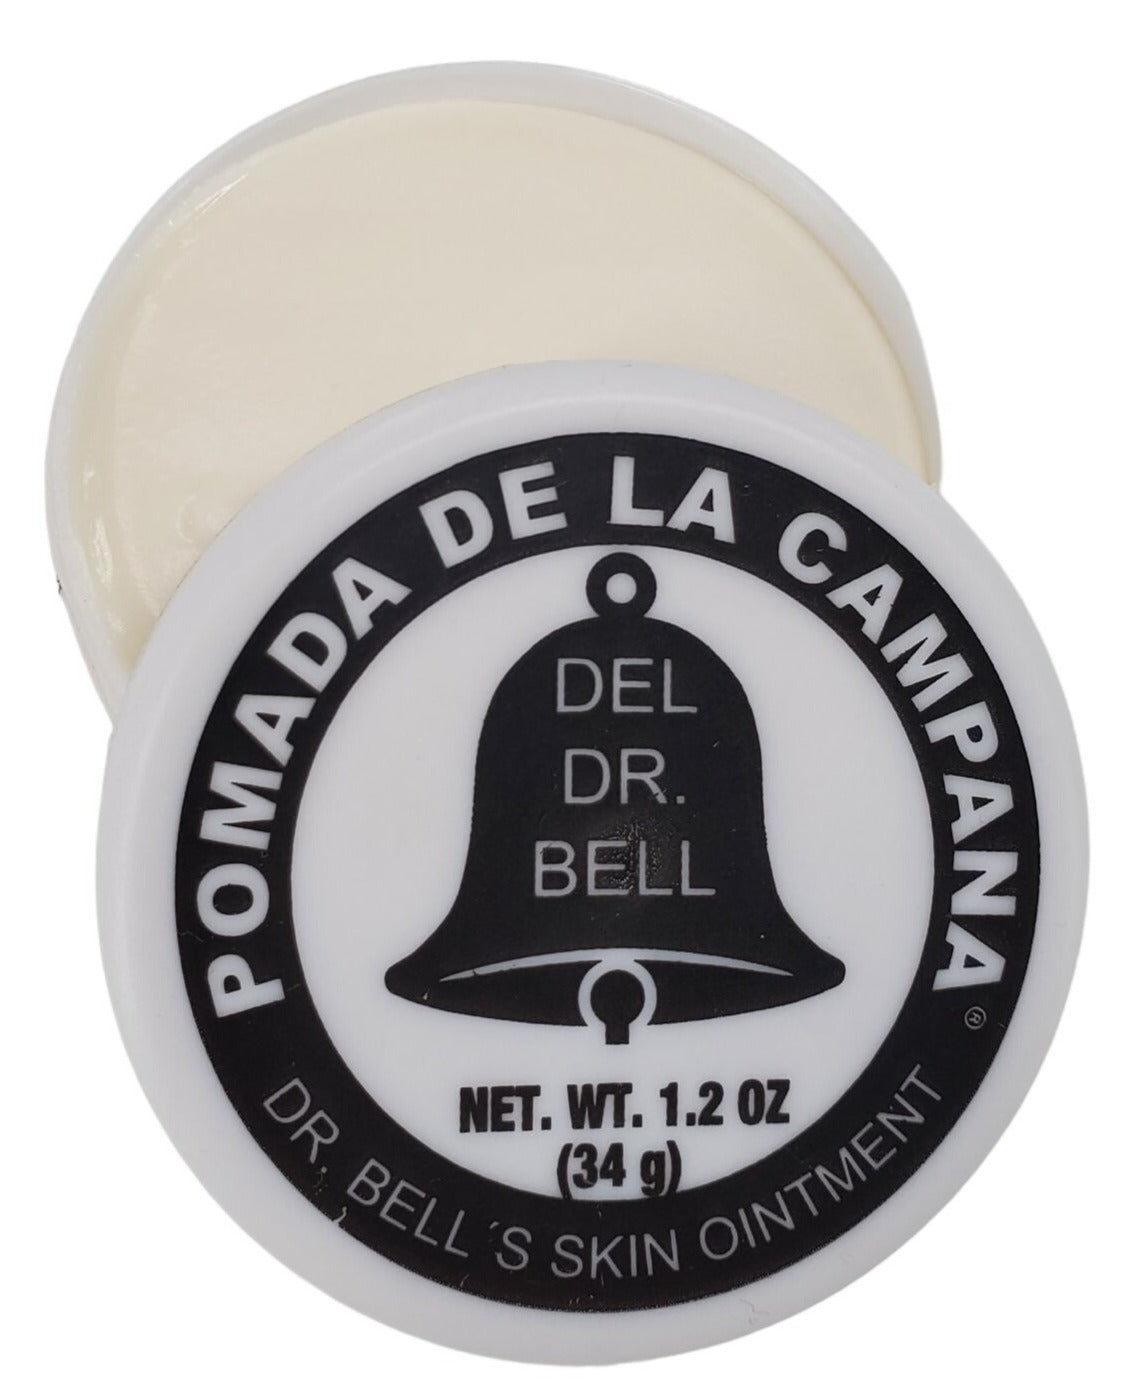 Del DR Bell Pomade Skin Ointment with Allantoin, Pomada De La Campana 1.2 Ounce Container